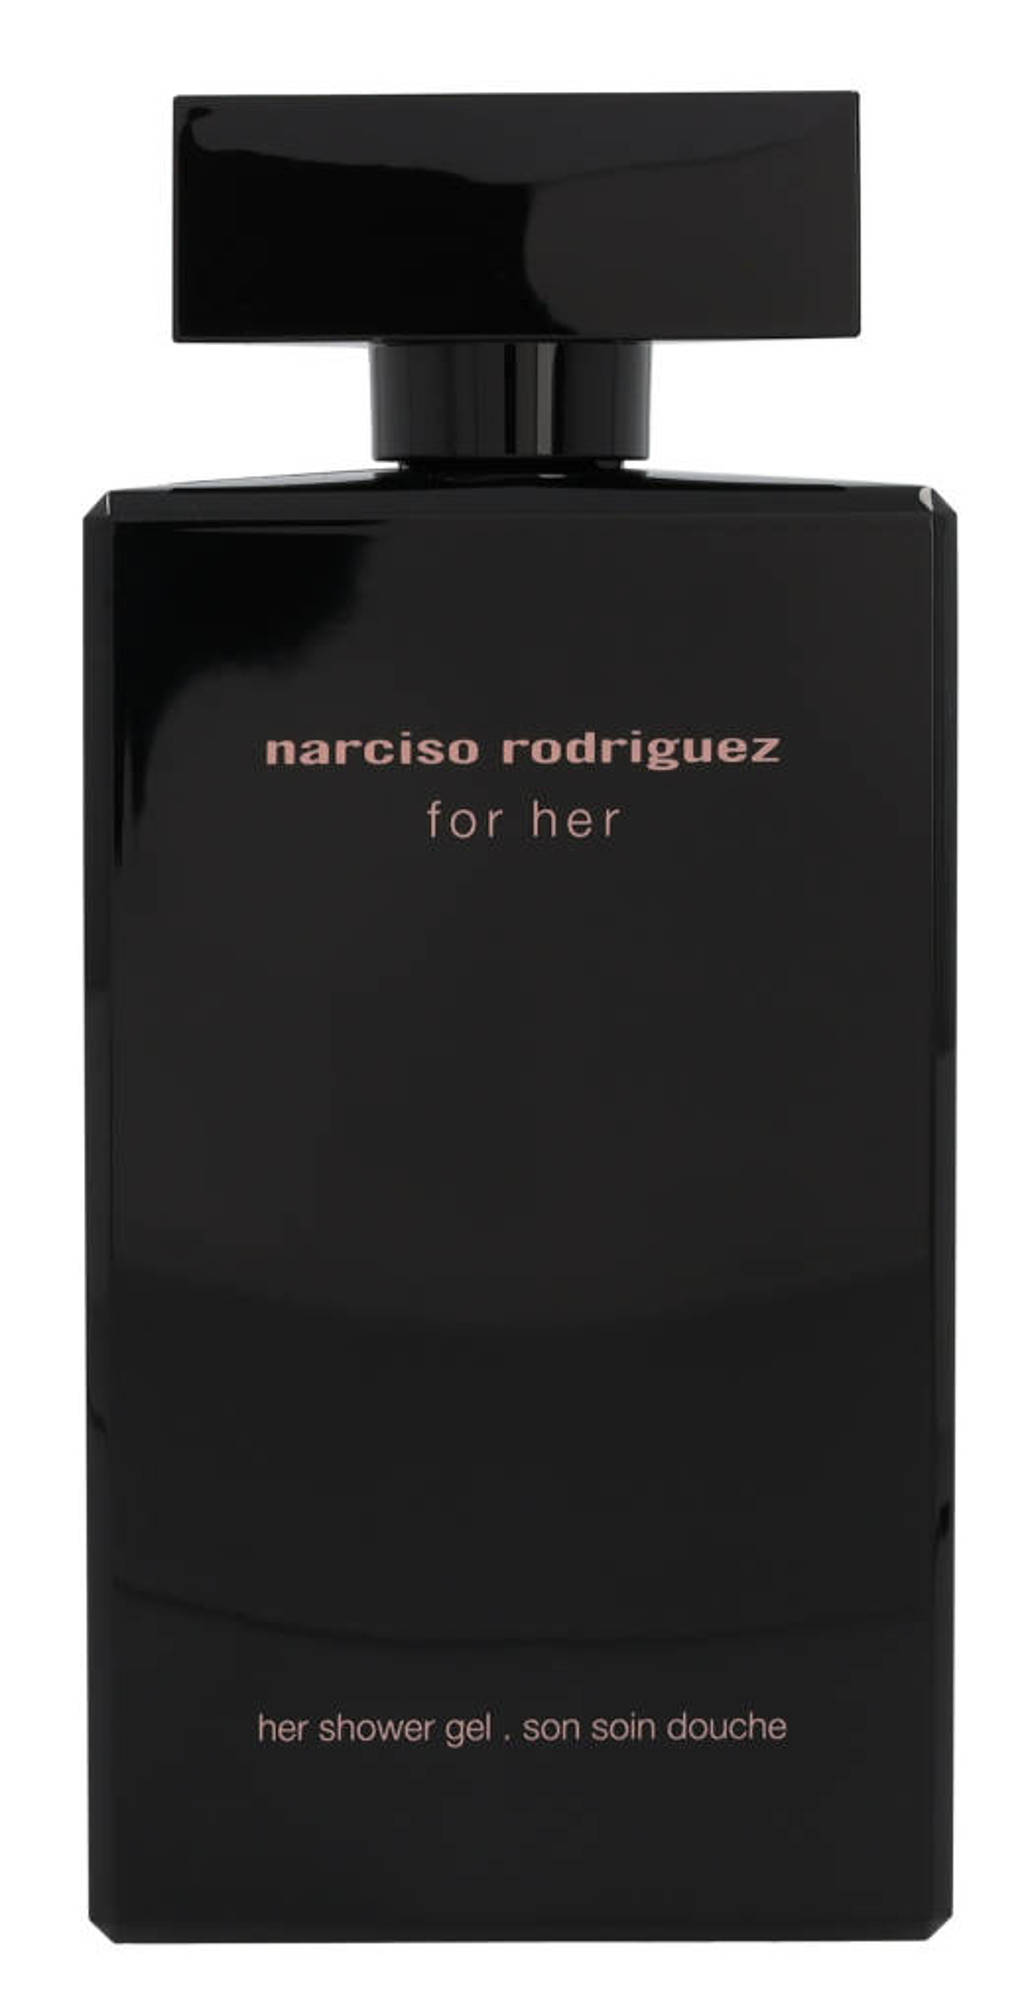 Narciso Rodriguez For Her douchegel - 200 ml